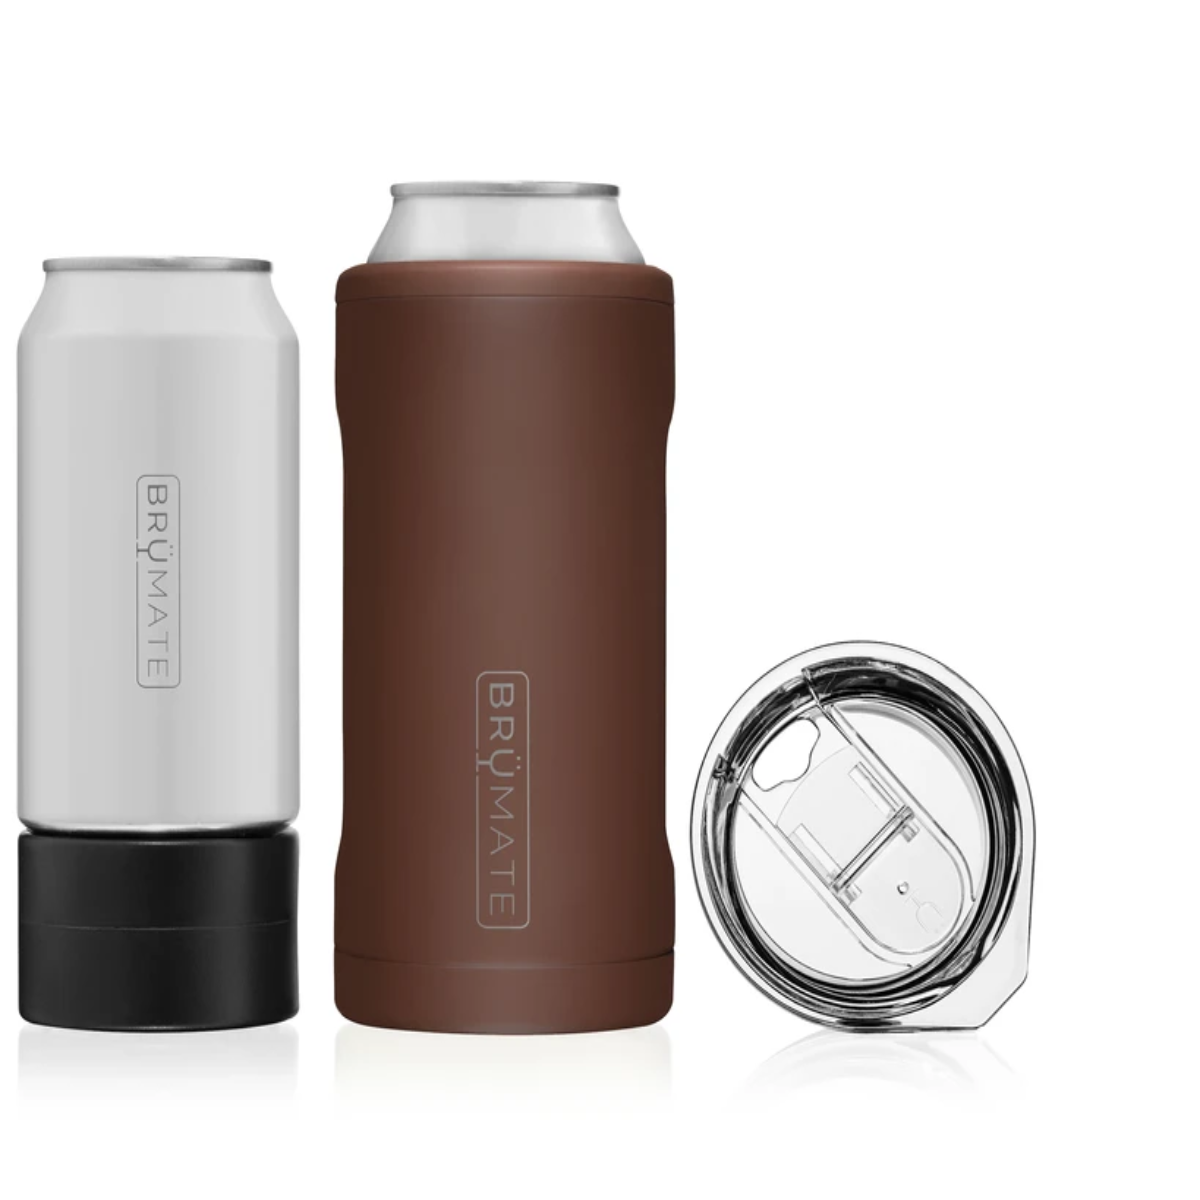 Brown cylindrical can holder, alongside a black cylindrical can stand with a clear lid next to it